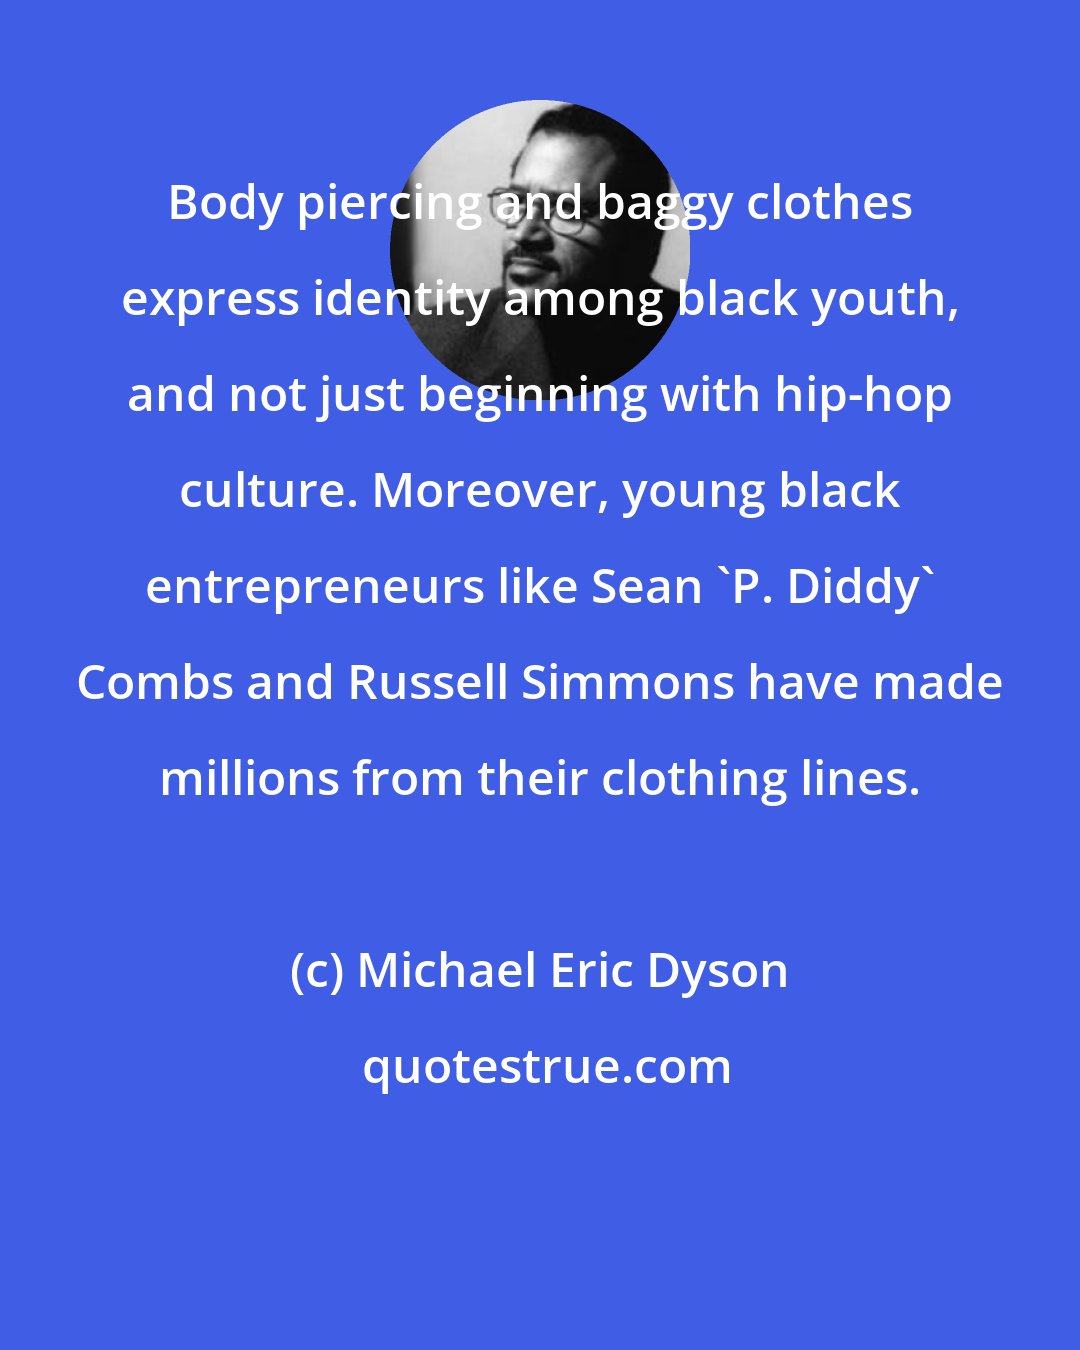 Michael Eric Dyson: Body piercing and baggy clothes express identity among black youth, and not just beginning with hip-hop culture. Moreover, young black entrepreneurs like Sean 'P. Diddy' Combs and Russell Simmons have made millions from their clothing lines.